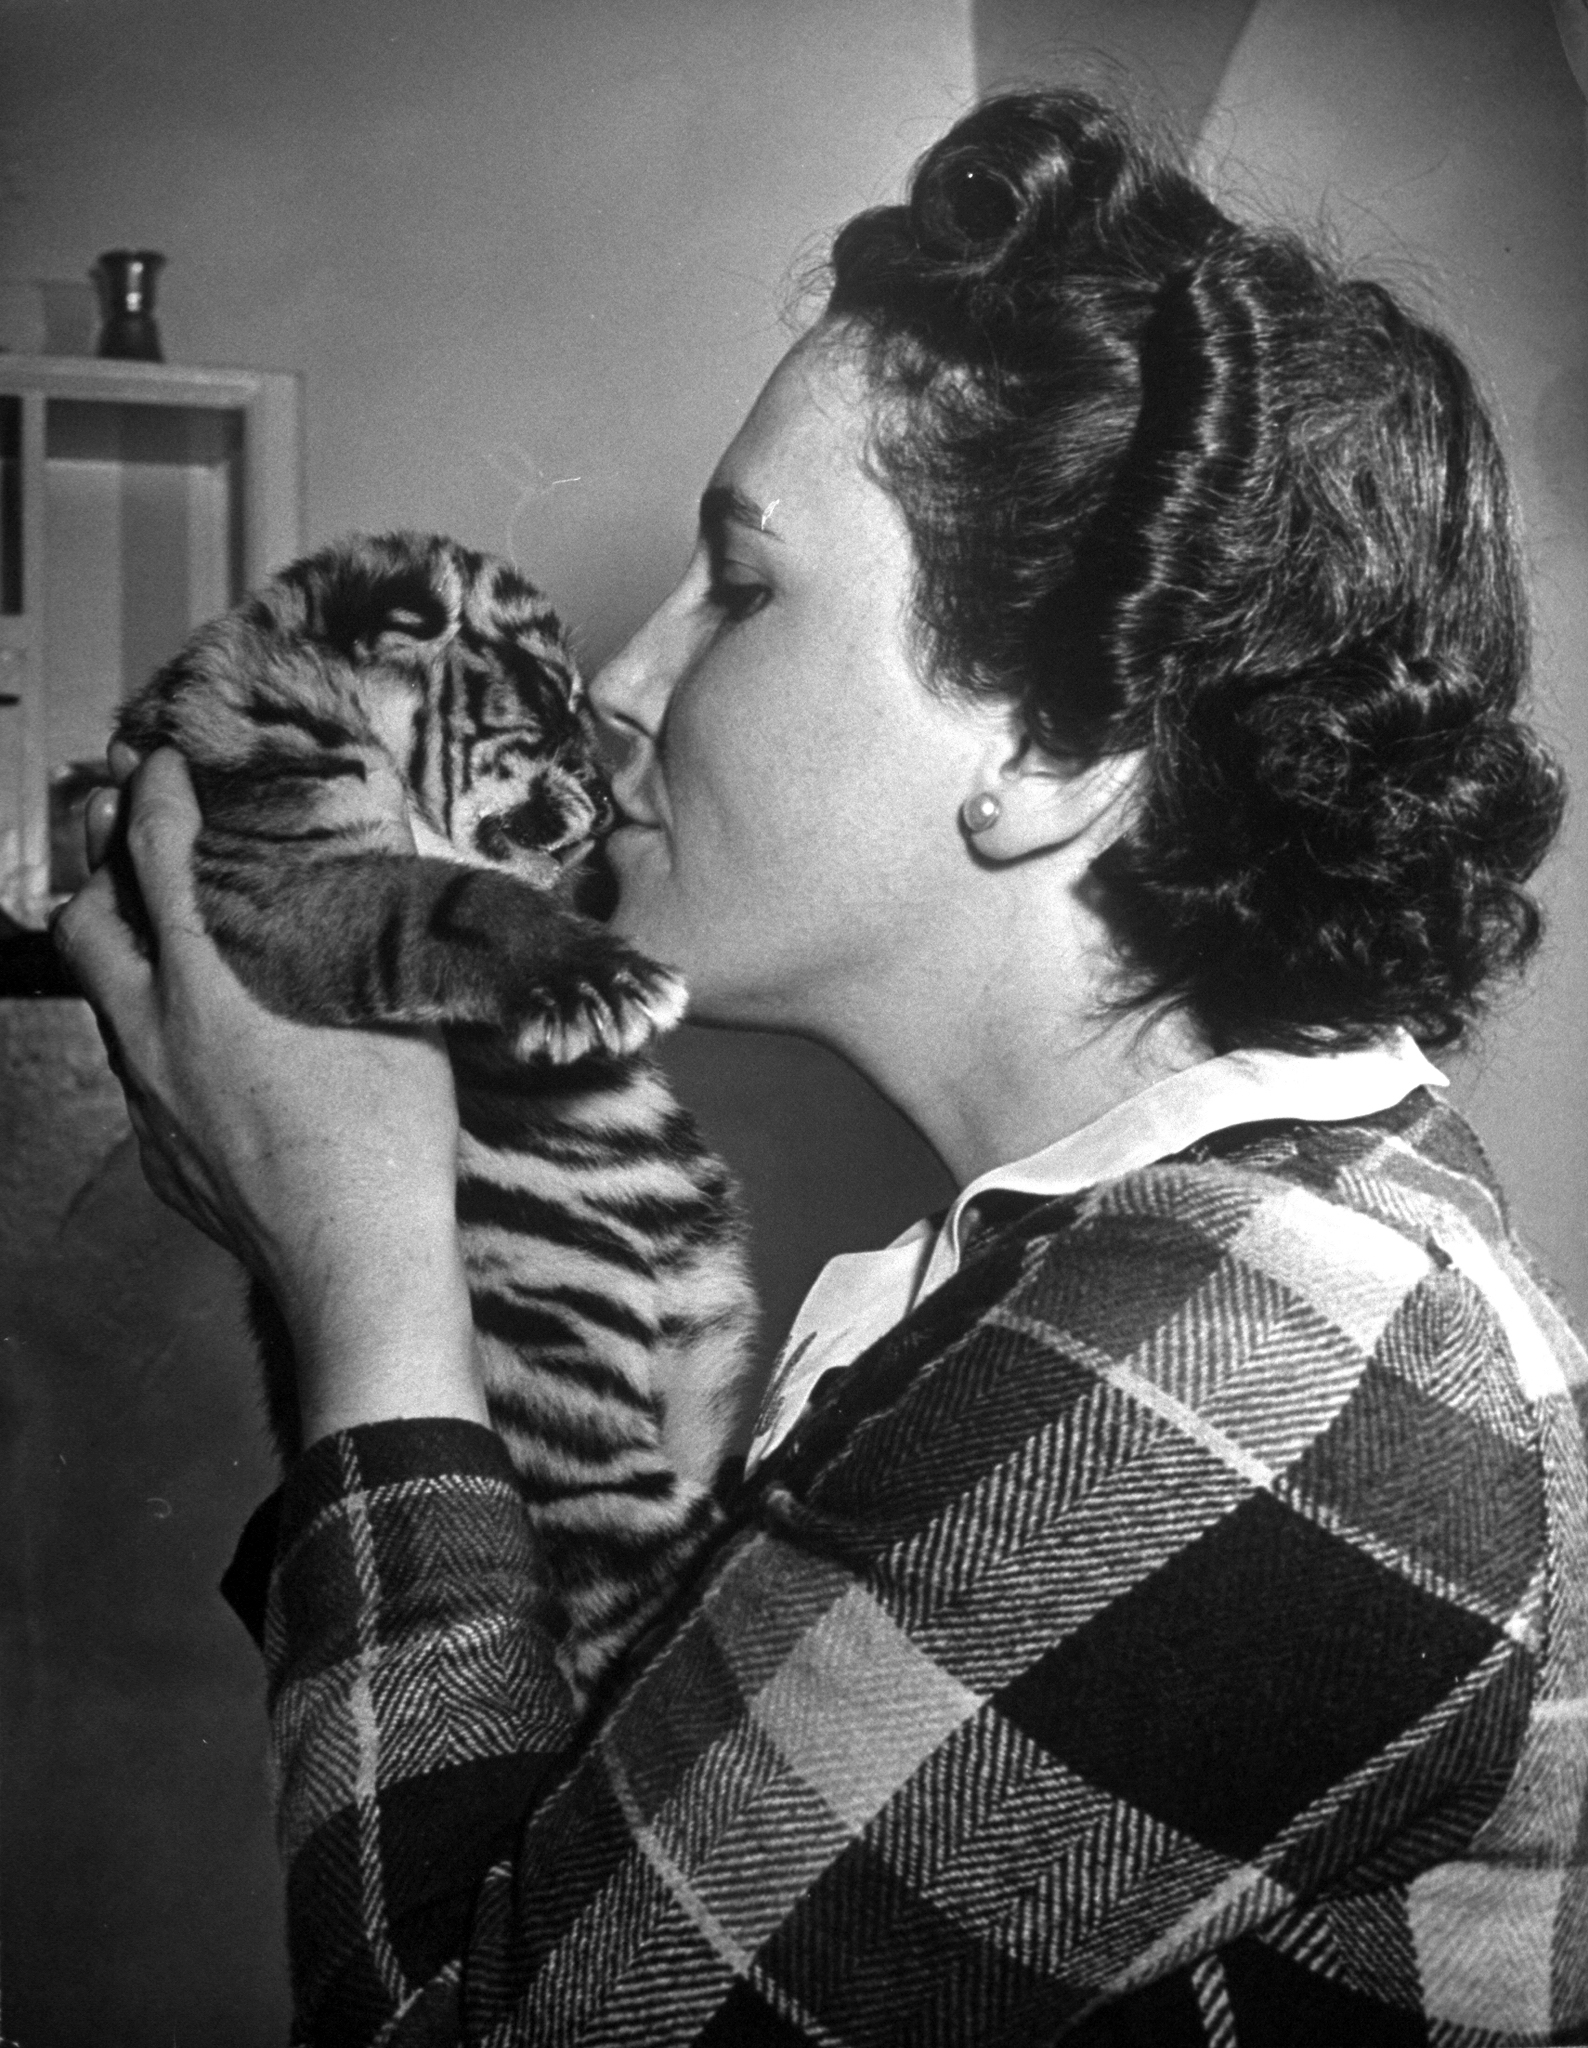 Mrs. Martini, wife of the Bronx Zoo lion keeper, kissing a tiger cub. 1944.